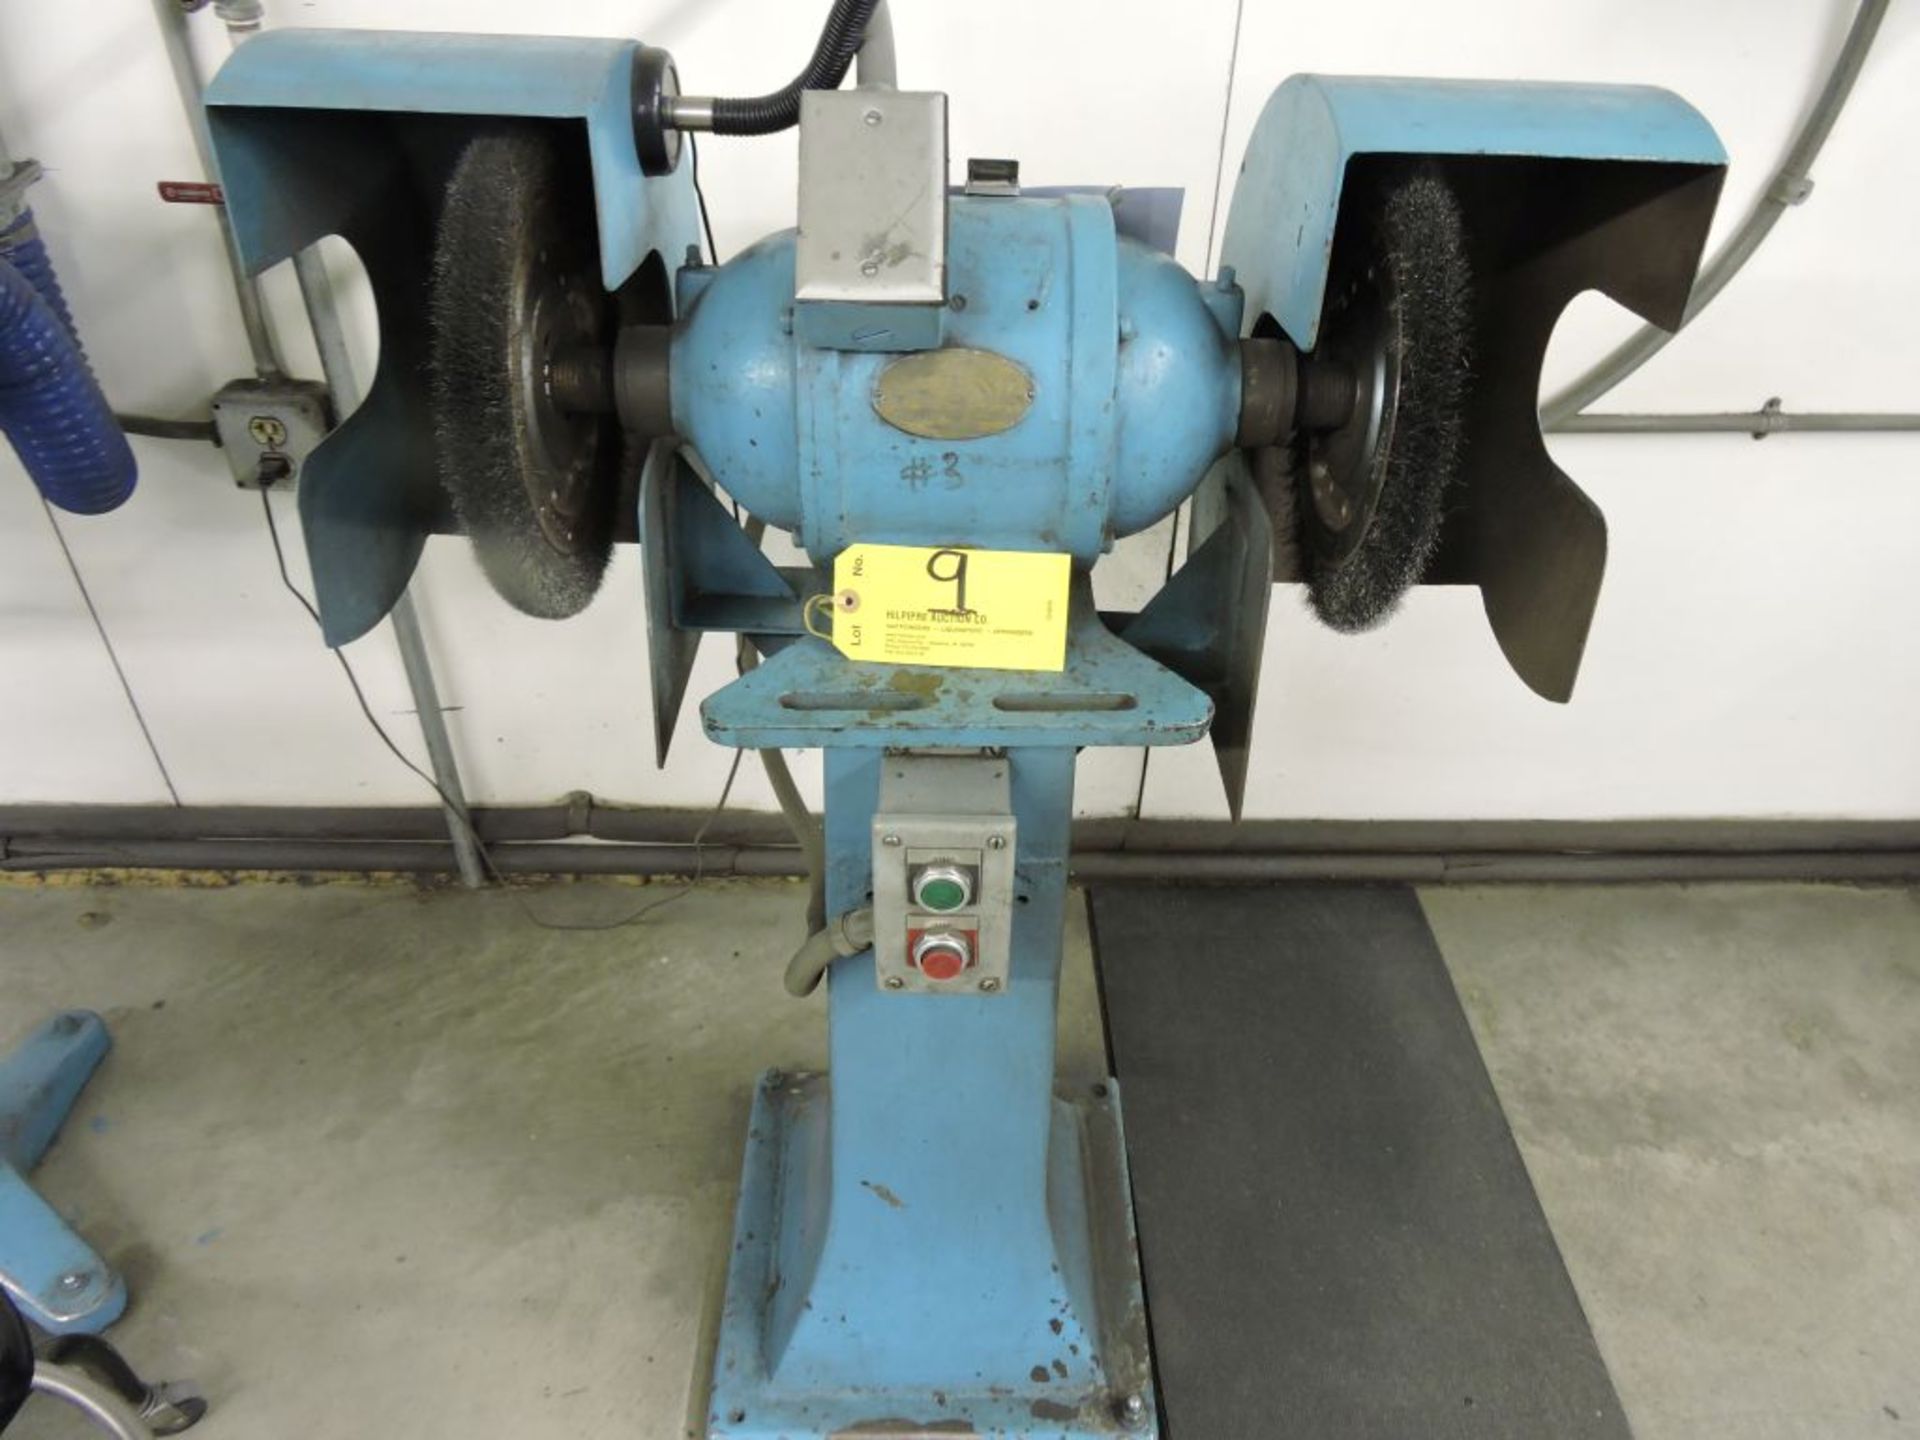 United States Electrical Tool Company double spindle grinder, model 10, sn 21186, 208 volt, 3 phase, - Image 2 of 6